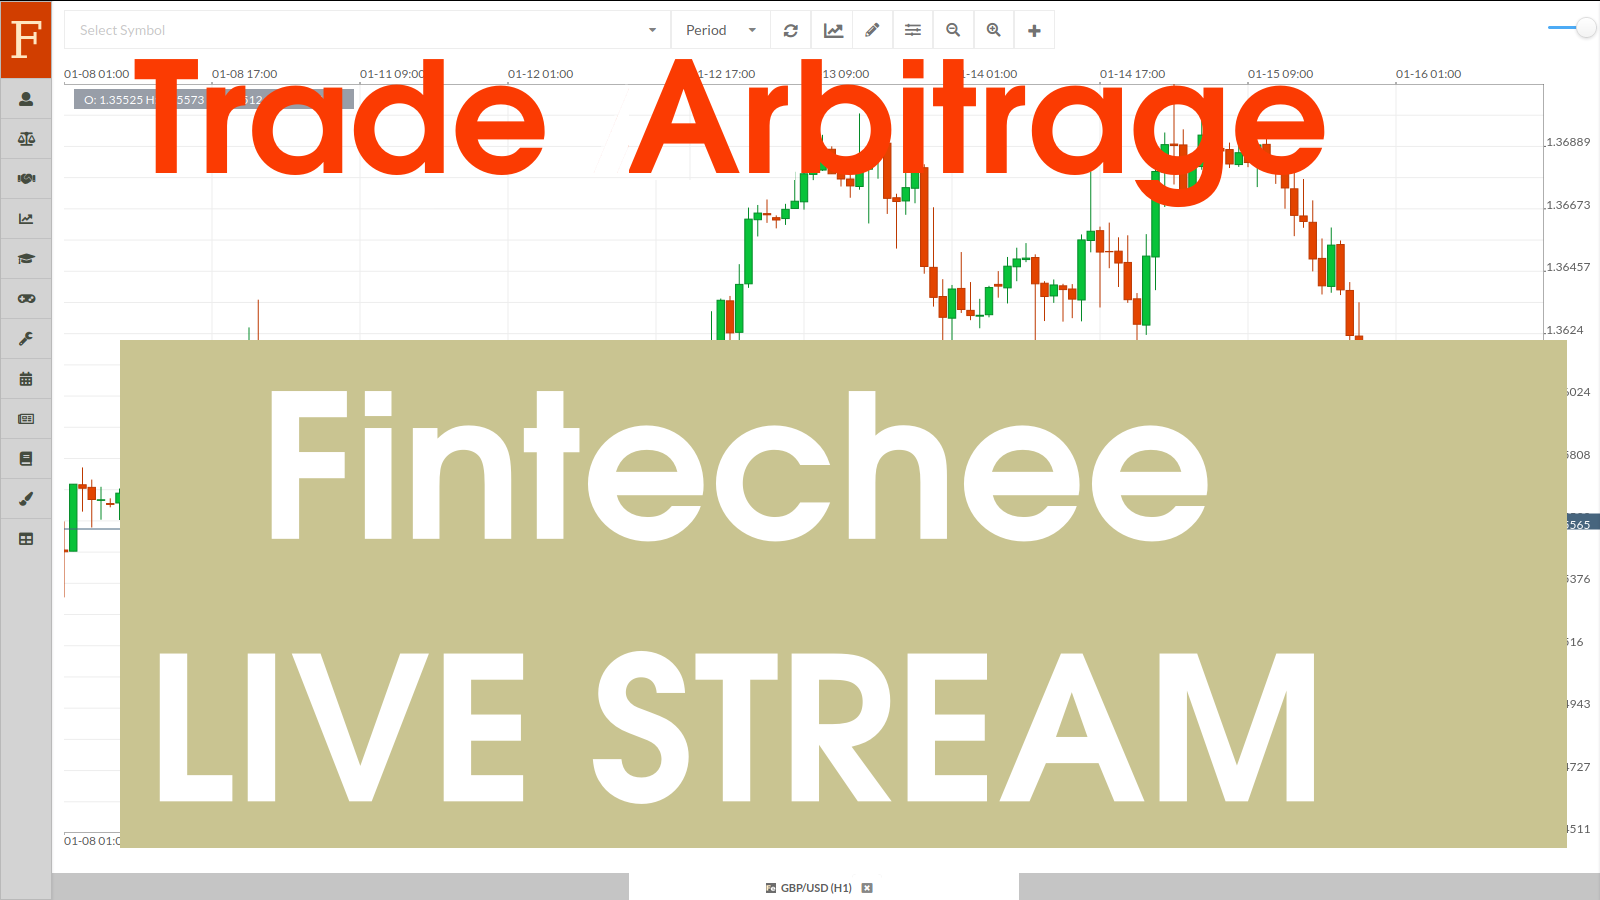 Arbitrage Monitor used to monitor the differences between Fintechee's streaming quotes and Oanda's streaming quotes